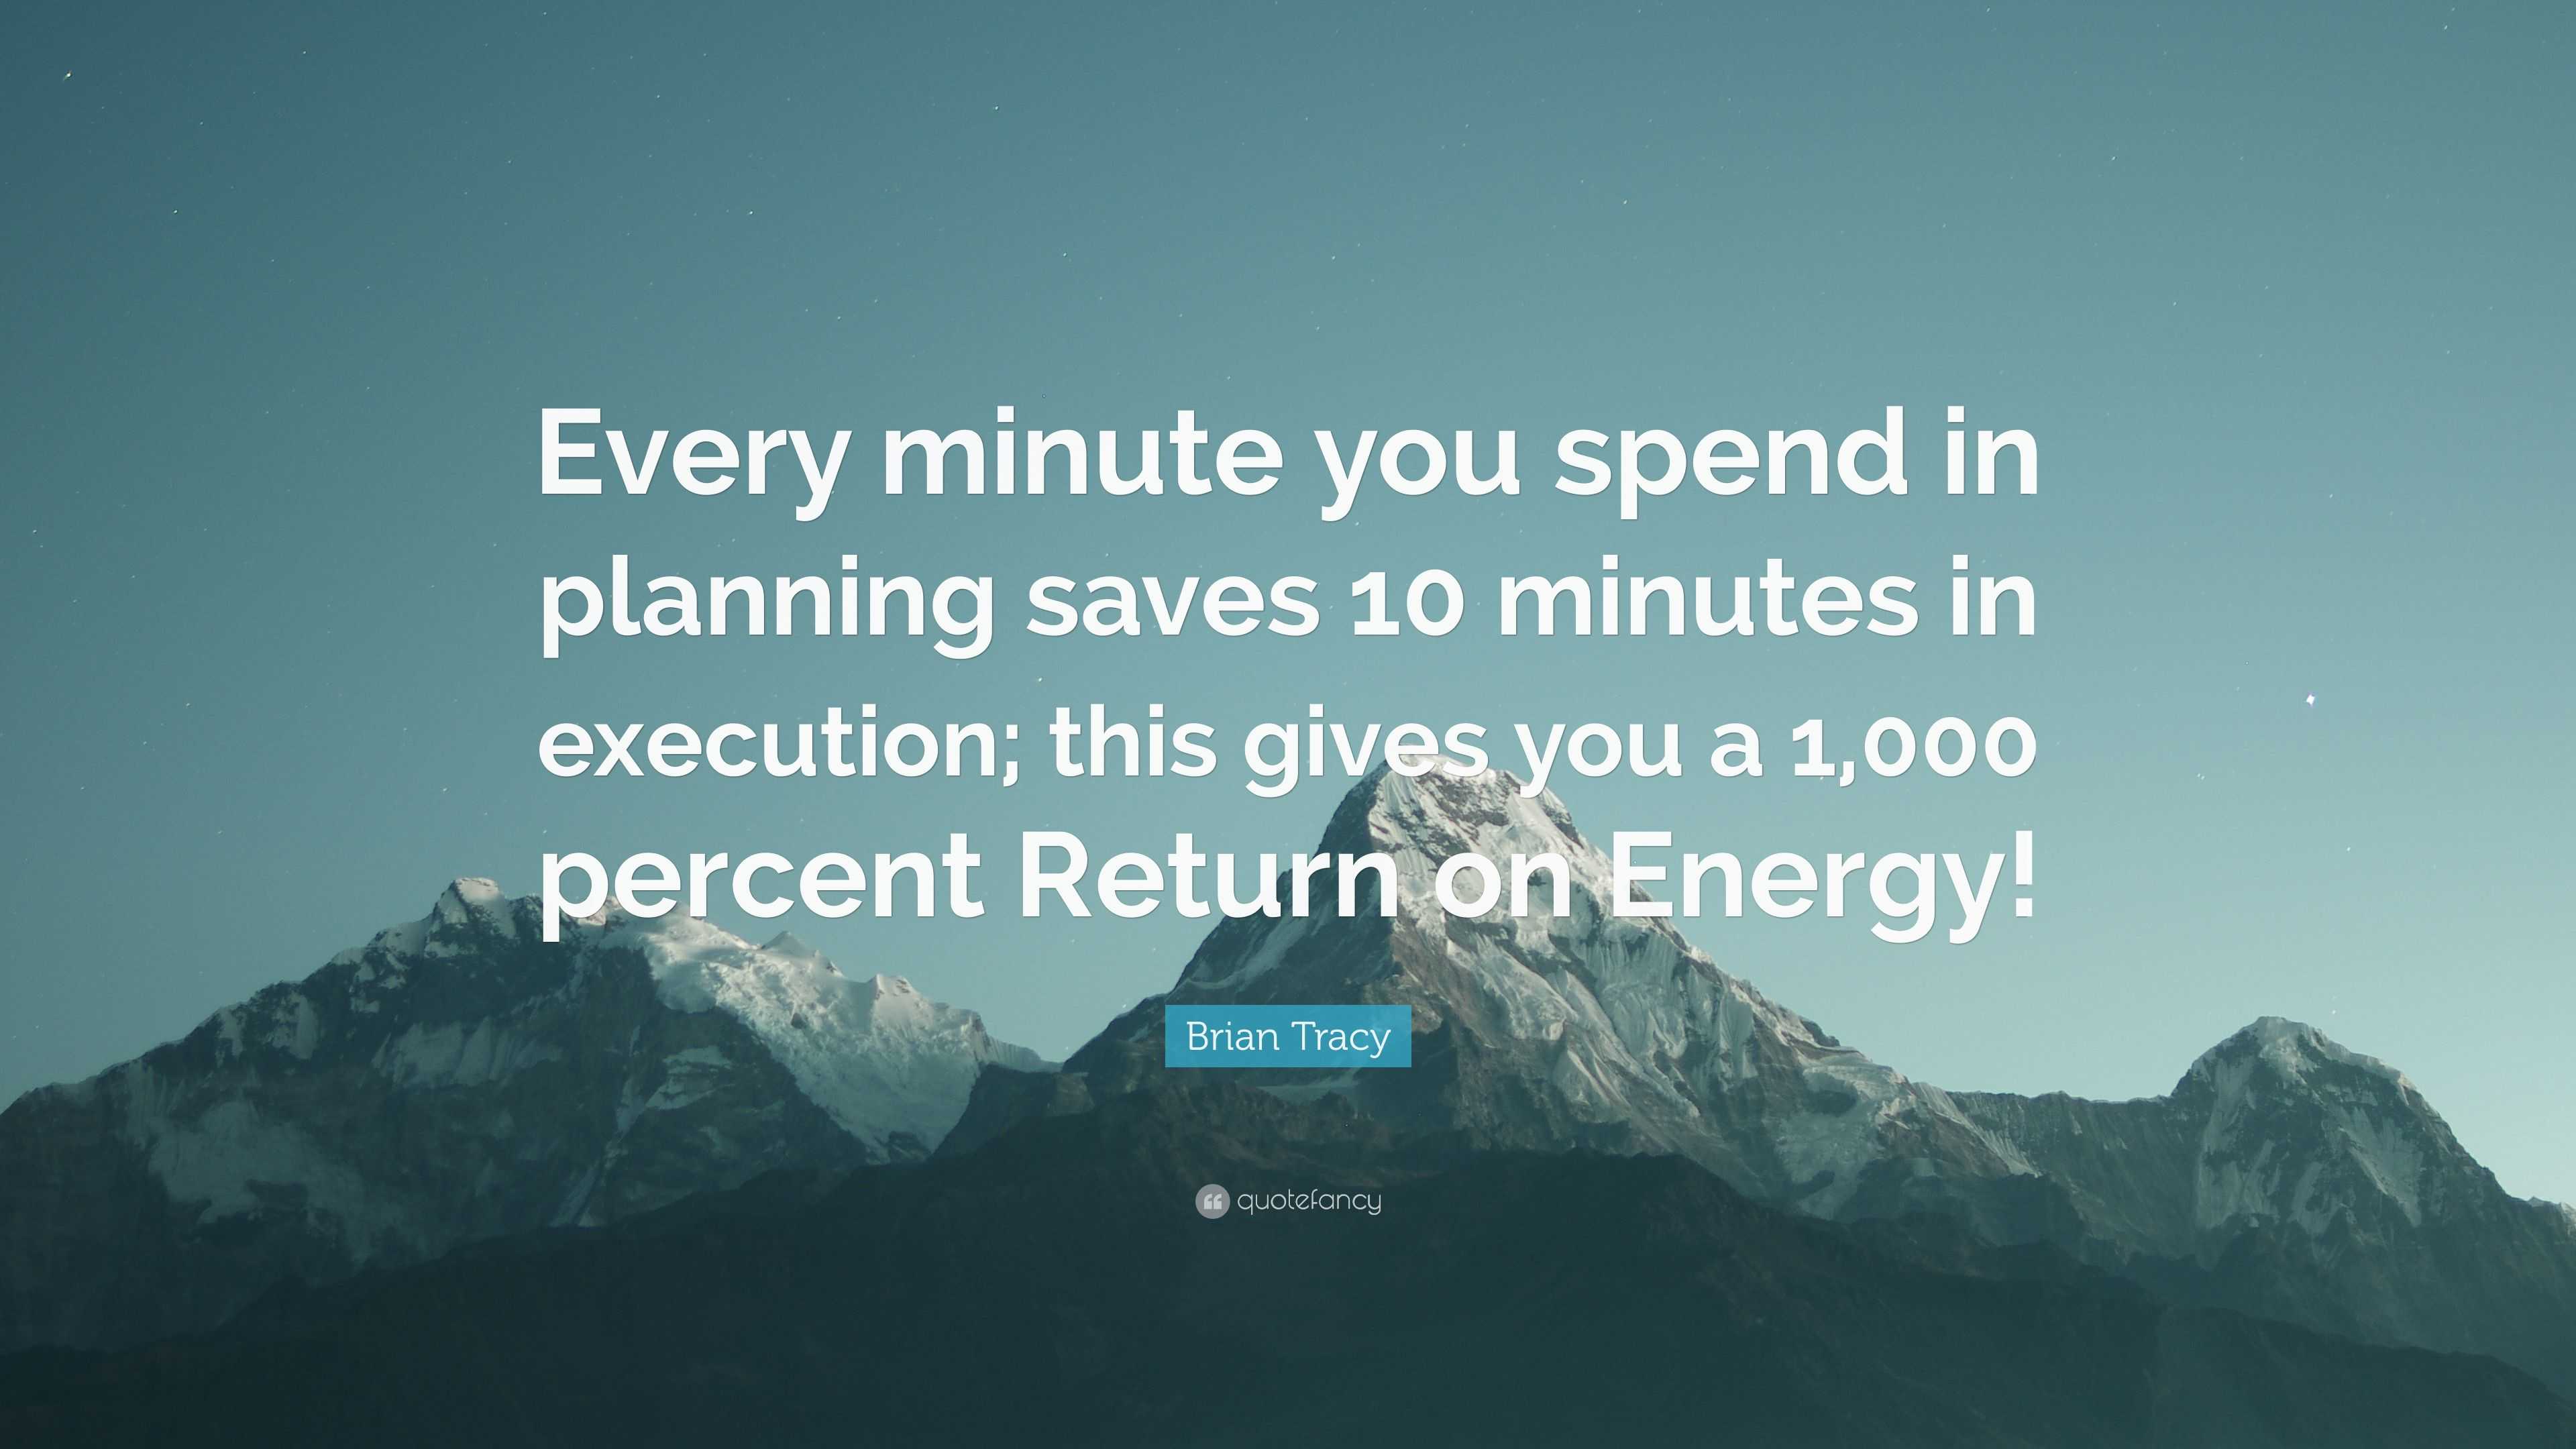 Brian Tracy Quote “Every minute you spend in planning